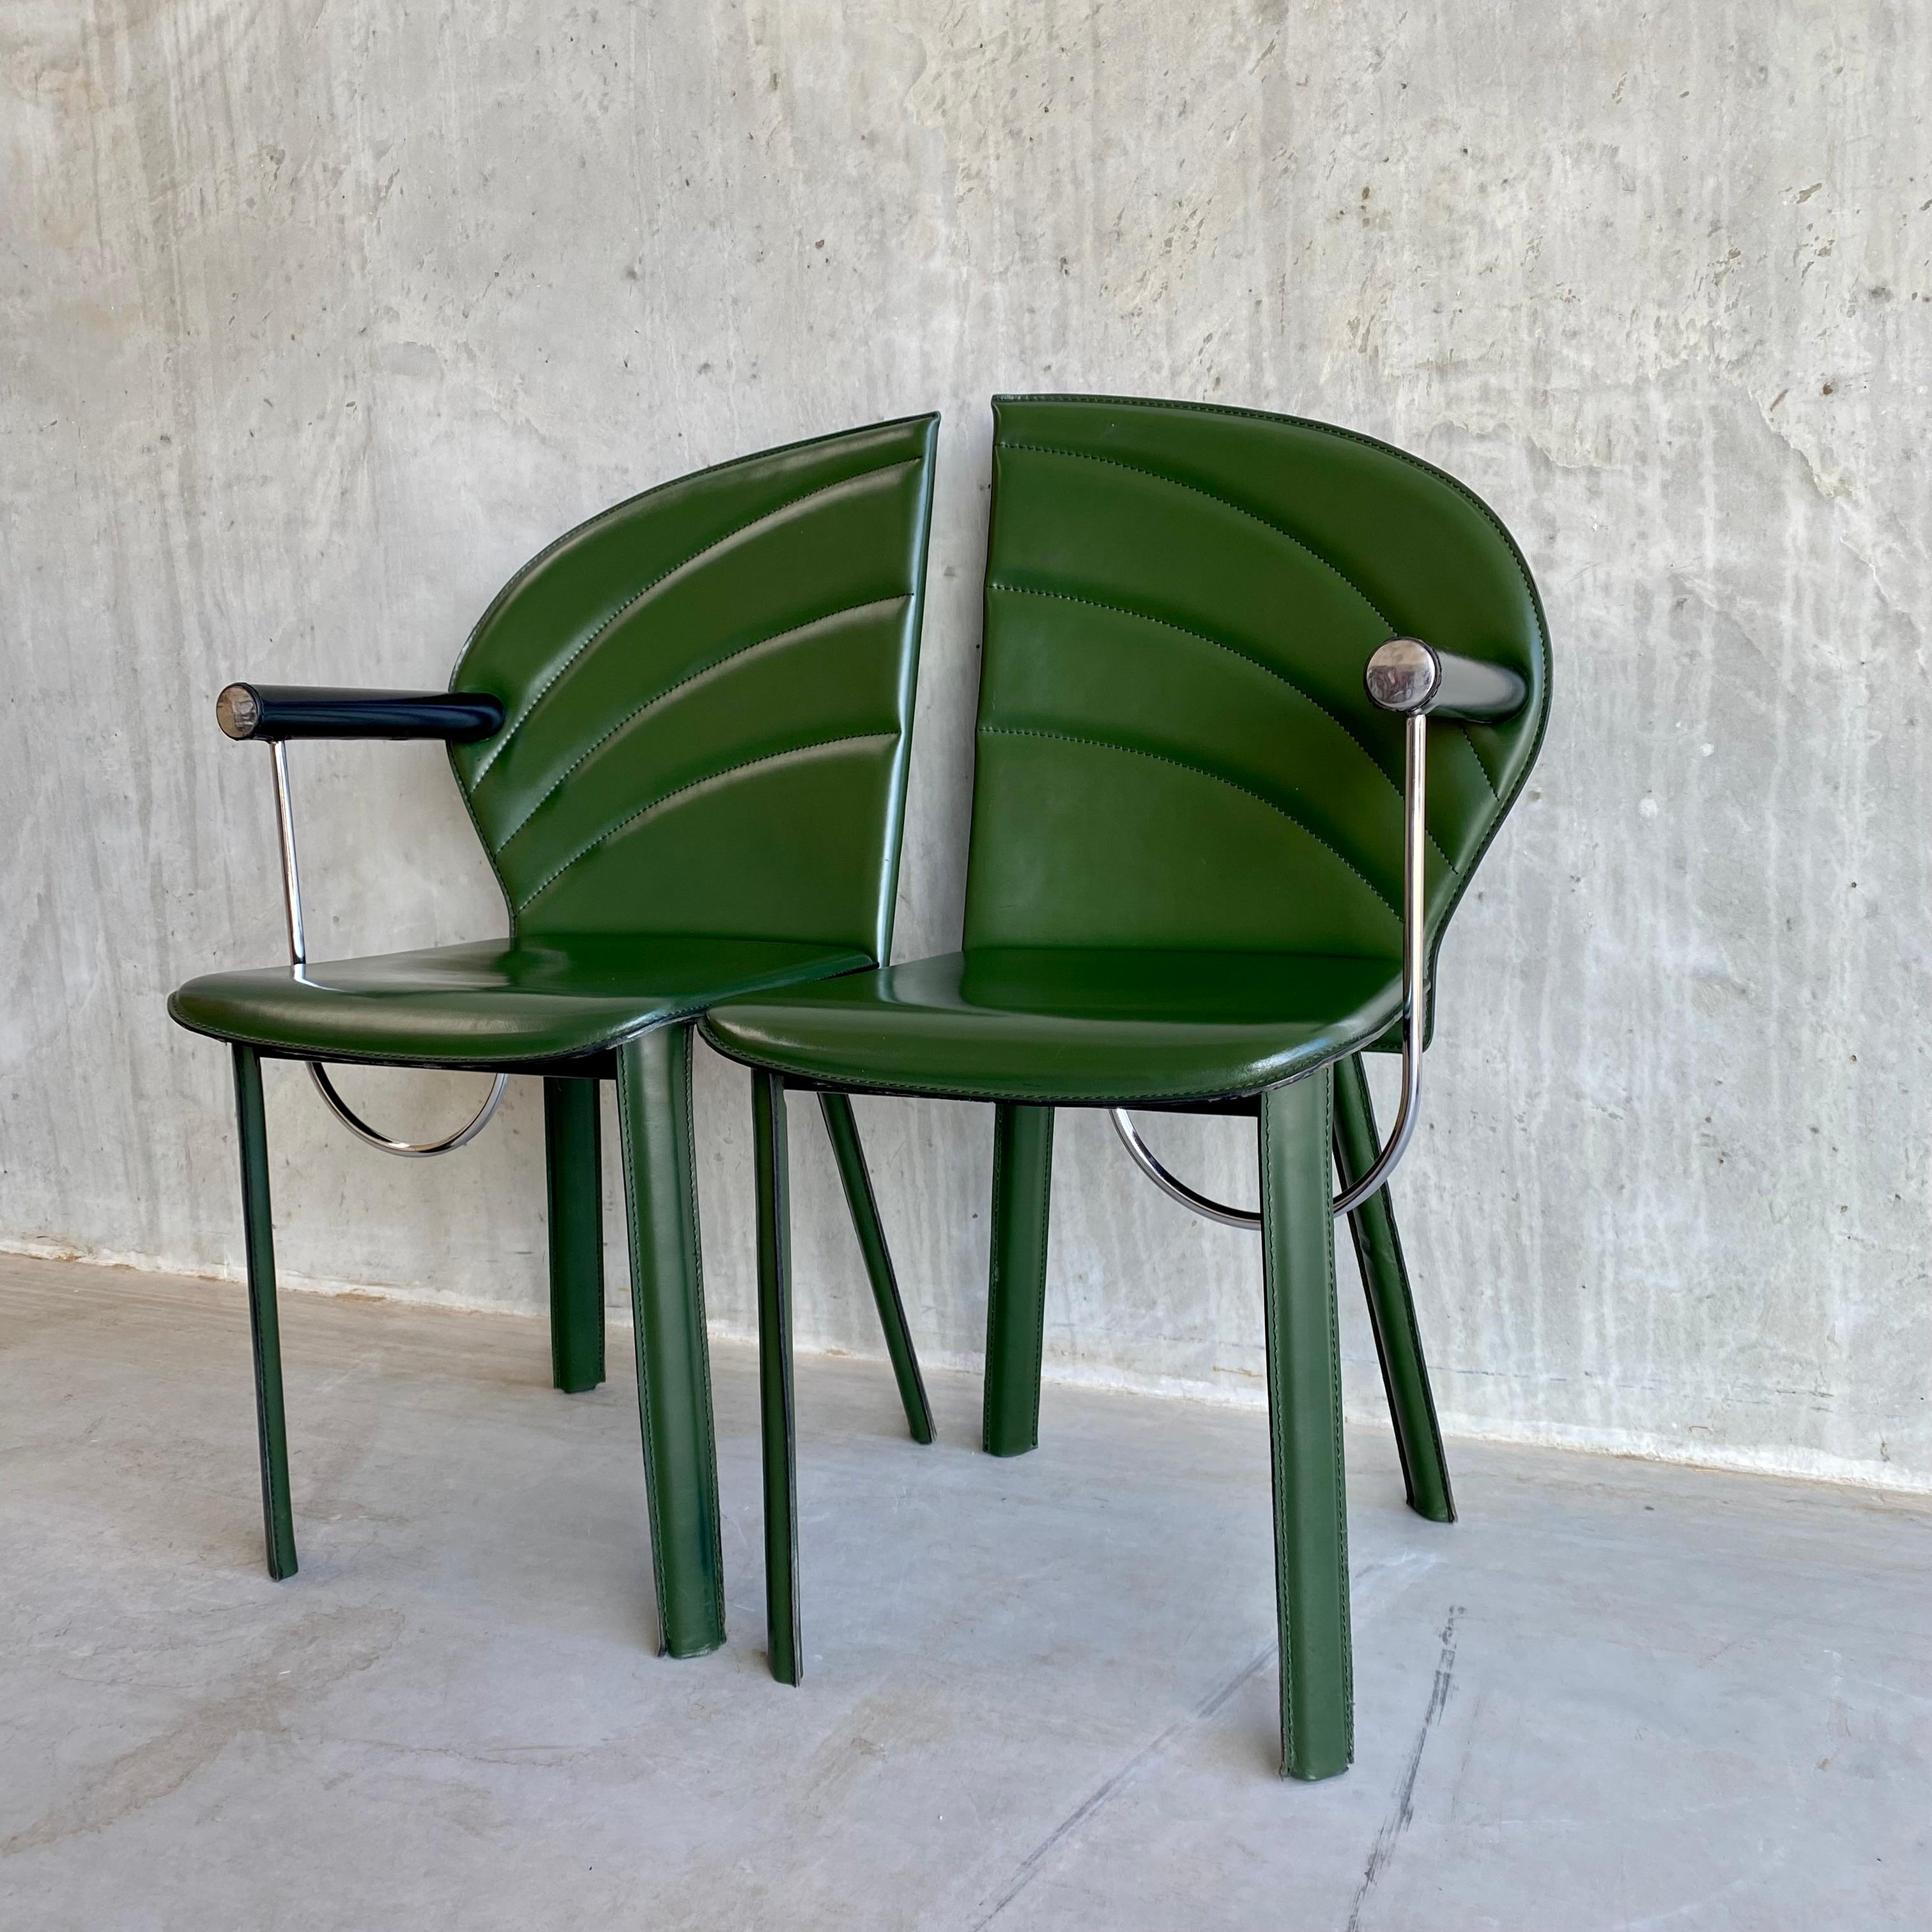 2 x Naos Green Leather Arm Chairs by Mario Morbidelli Italy 1980 For Sale 3